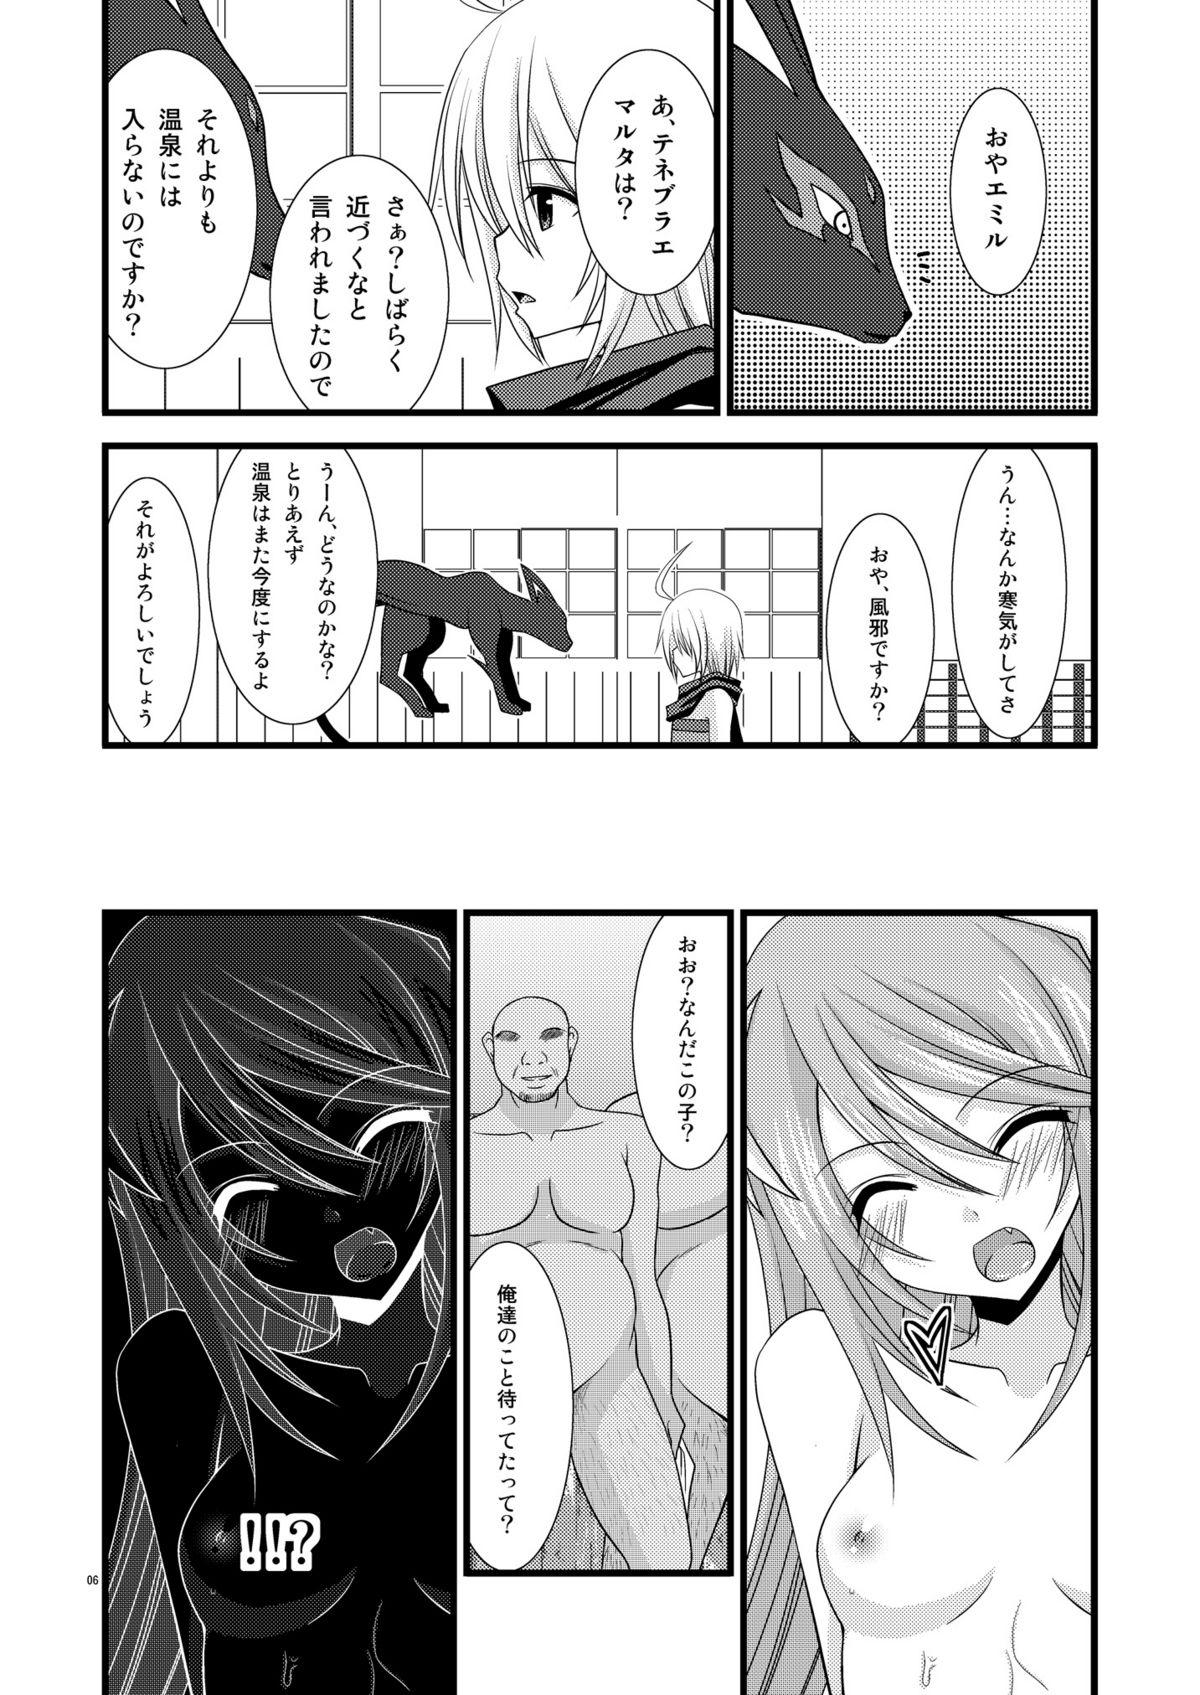 Harcore DREAM REALIZE - Tales of symphonia Phat Ass - Page 5